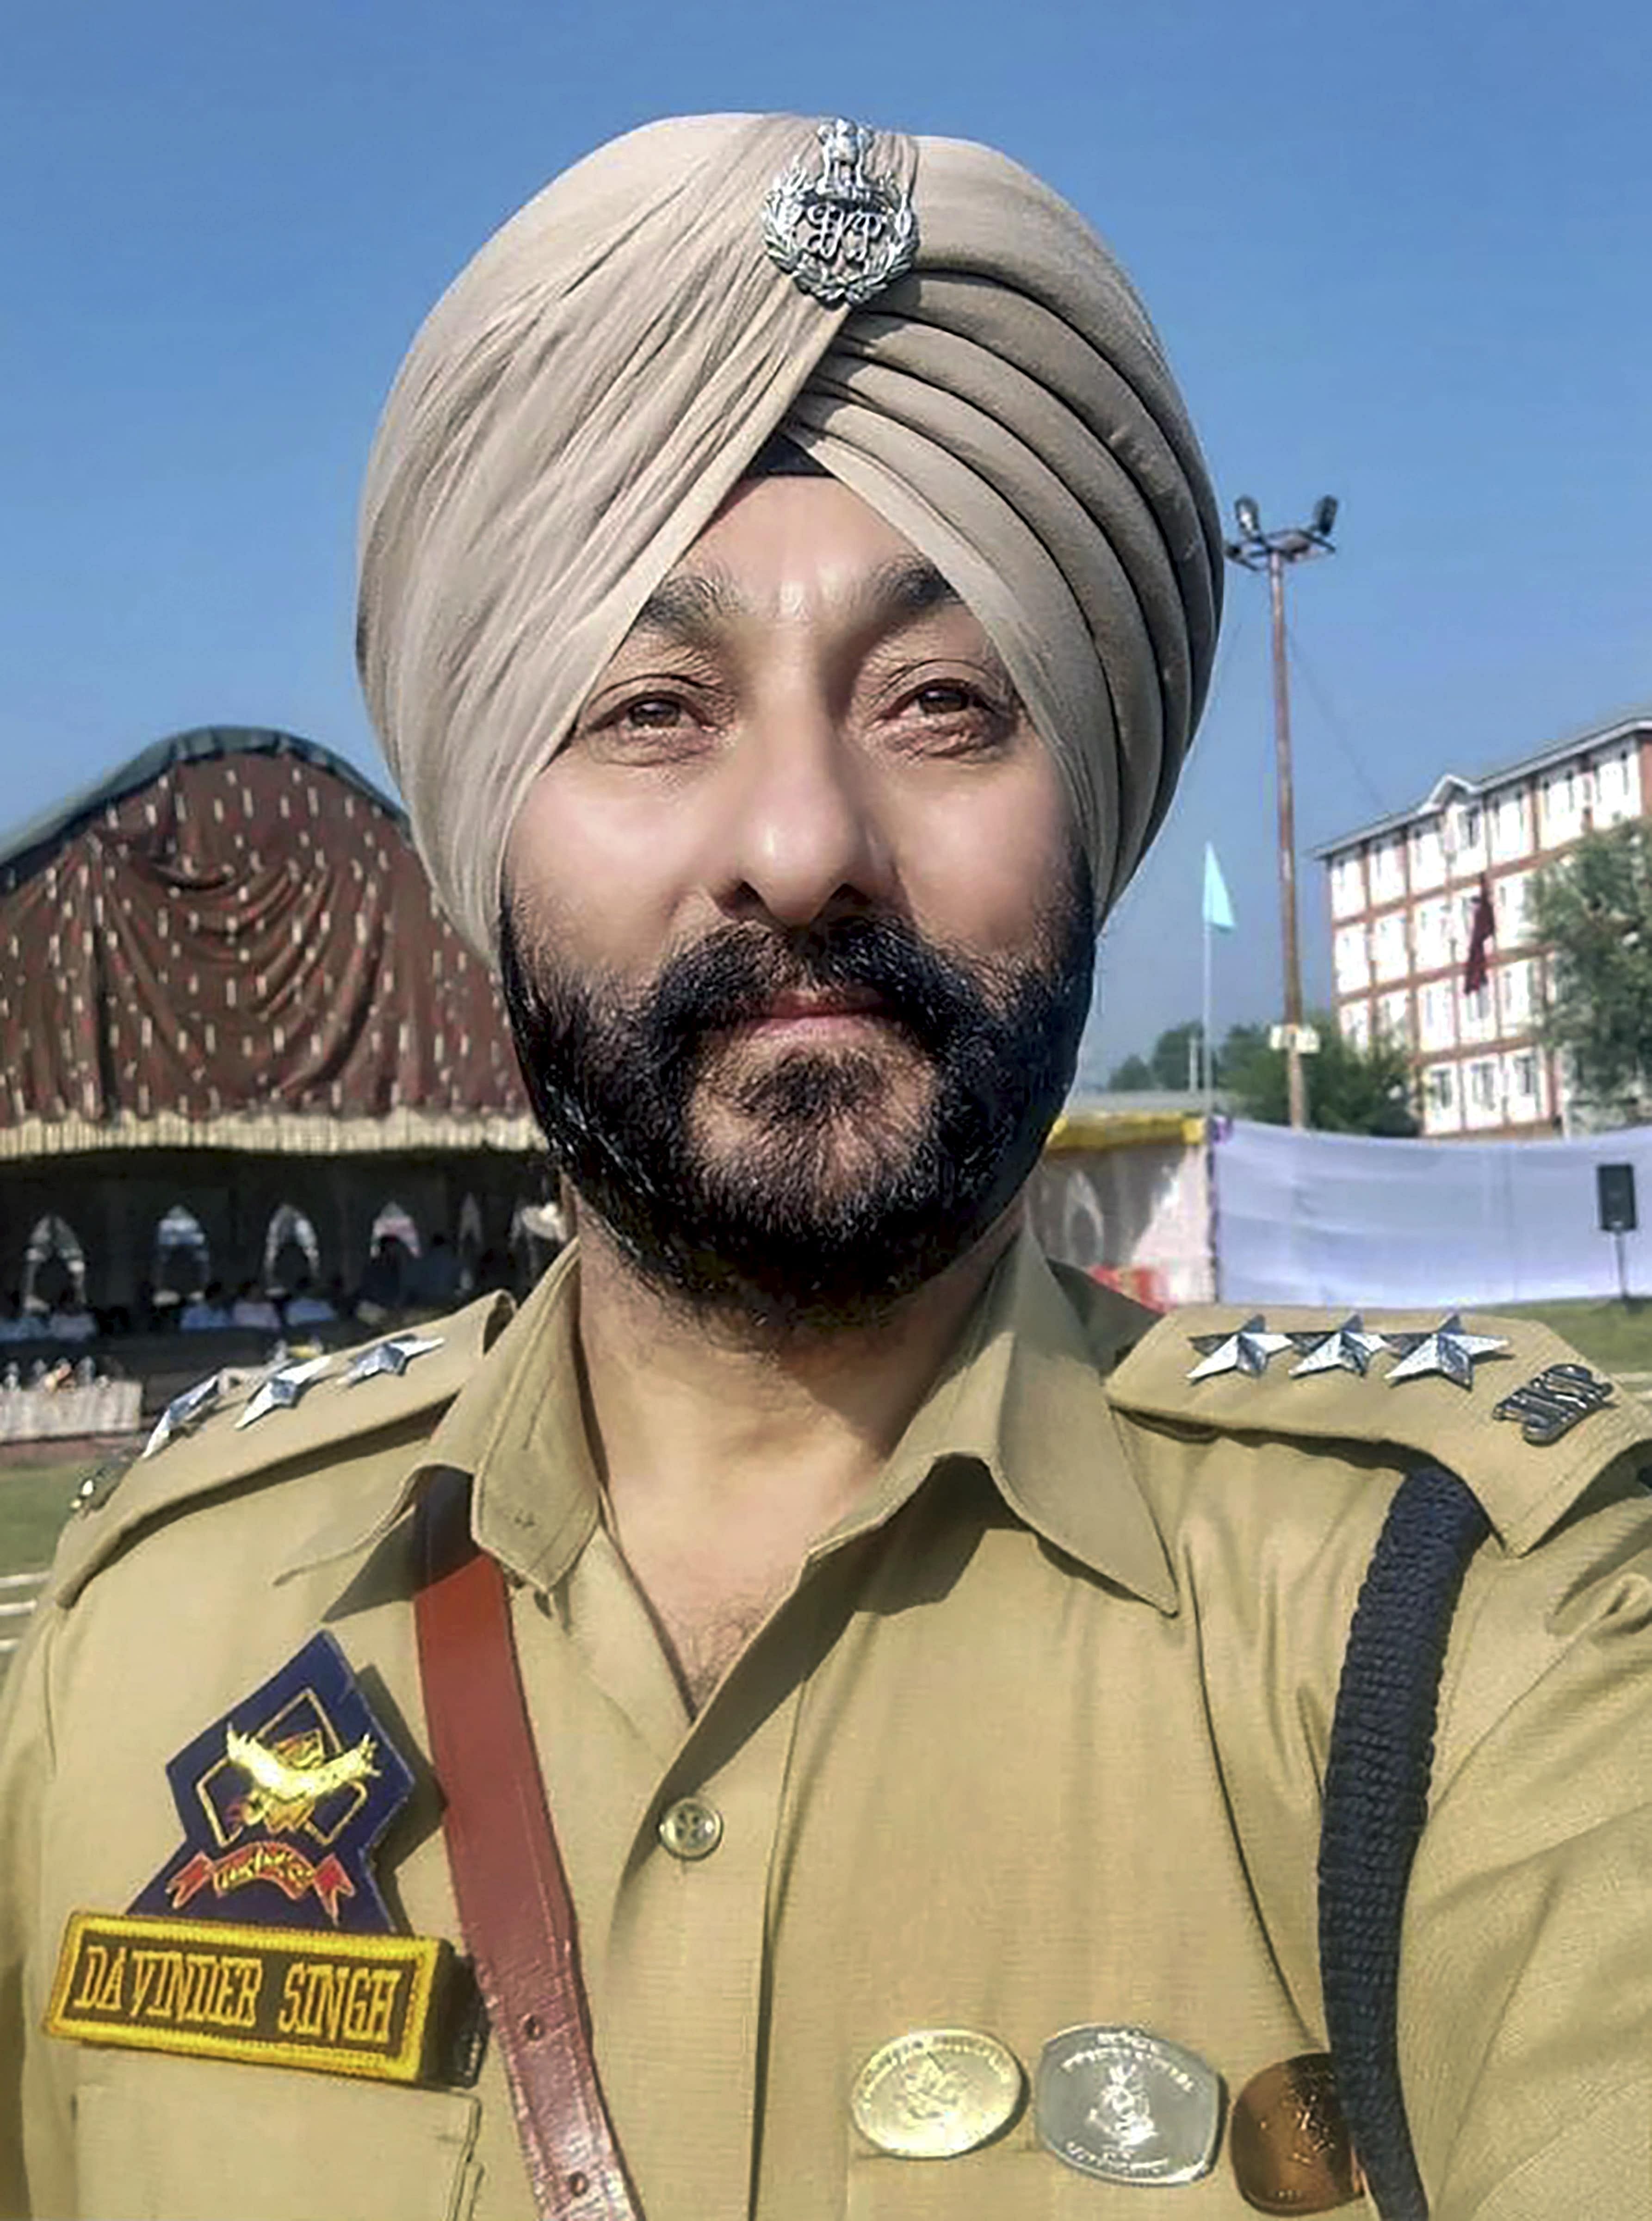  In this undated photo, is seen DSP Davinder Singh. Singh who was arrested along with two terrorists whom he was ferrying in a car in Kashmir Valley was sent to 15-day NIA custody by a special court on Thursday, Jan. 23, 2020. (PTI Photo)